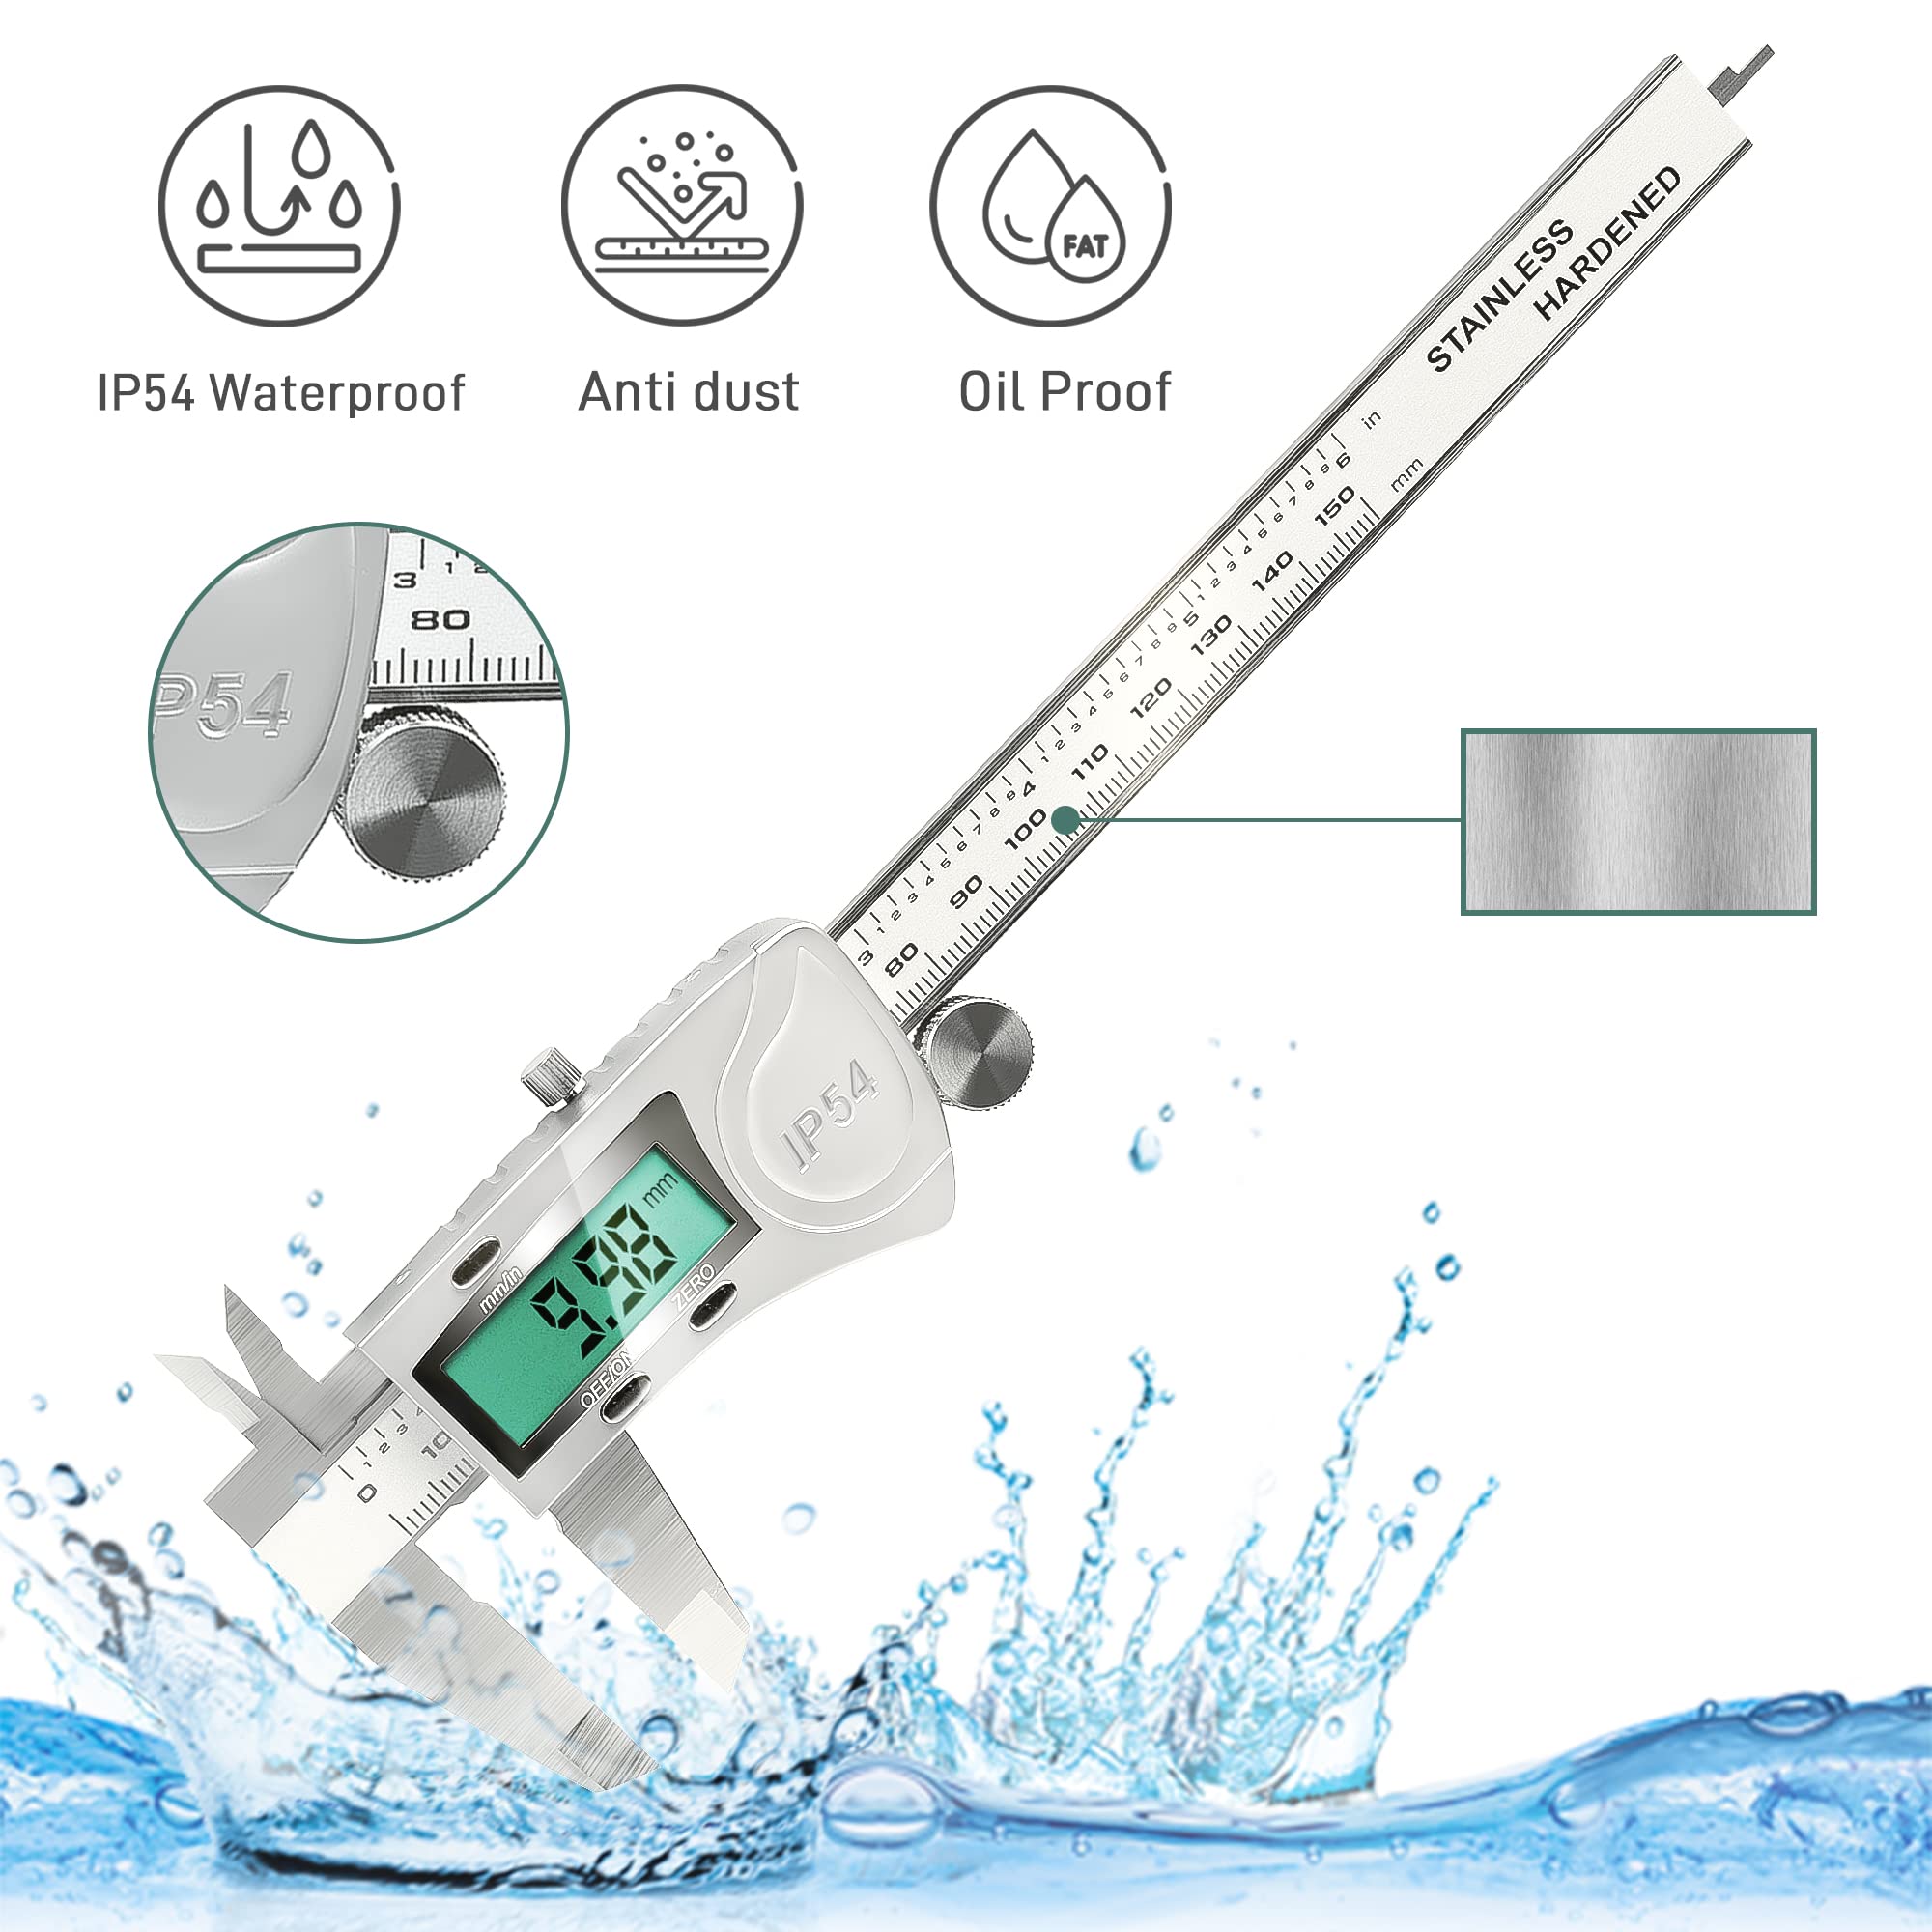 LOUISWARE Digital Caliper, IP54 Waterproof Stainless Steel Caliper Measuring Tool, Vernier Caliper with Huge LCD Screen, Auto - Off Feature, Inch and Millimeter Conversion (6 Inch /150 mm)